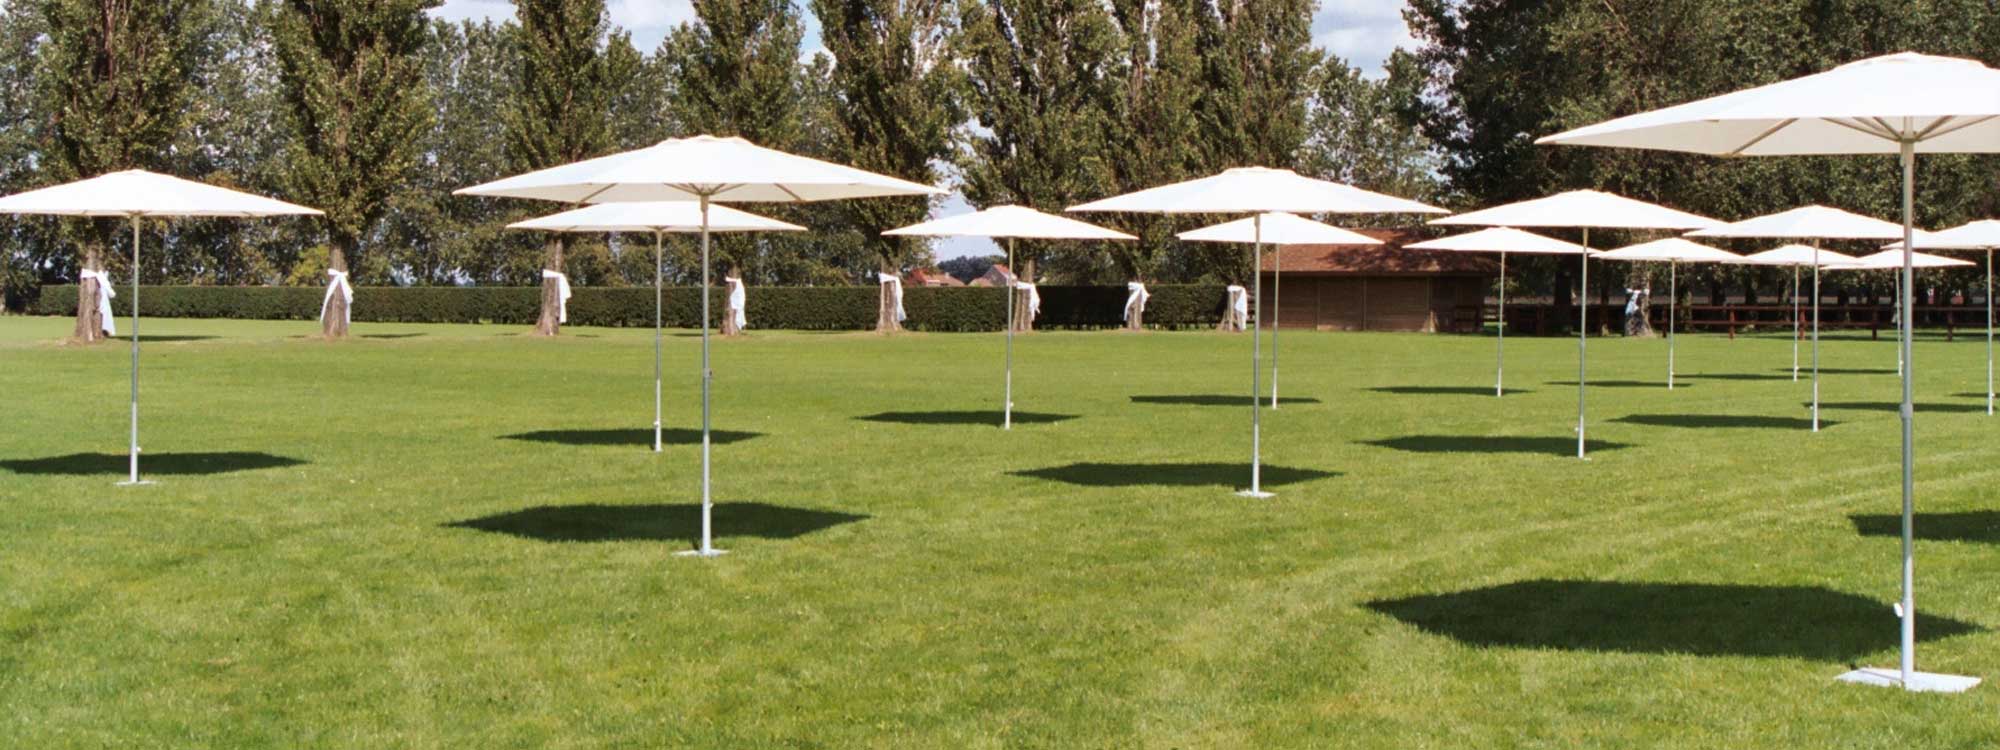 P50 mast parasol is a contemporary parasol that's easy to use, made in & durable parasol materials by Prostor high quality sun shade company.